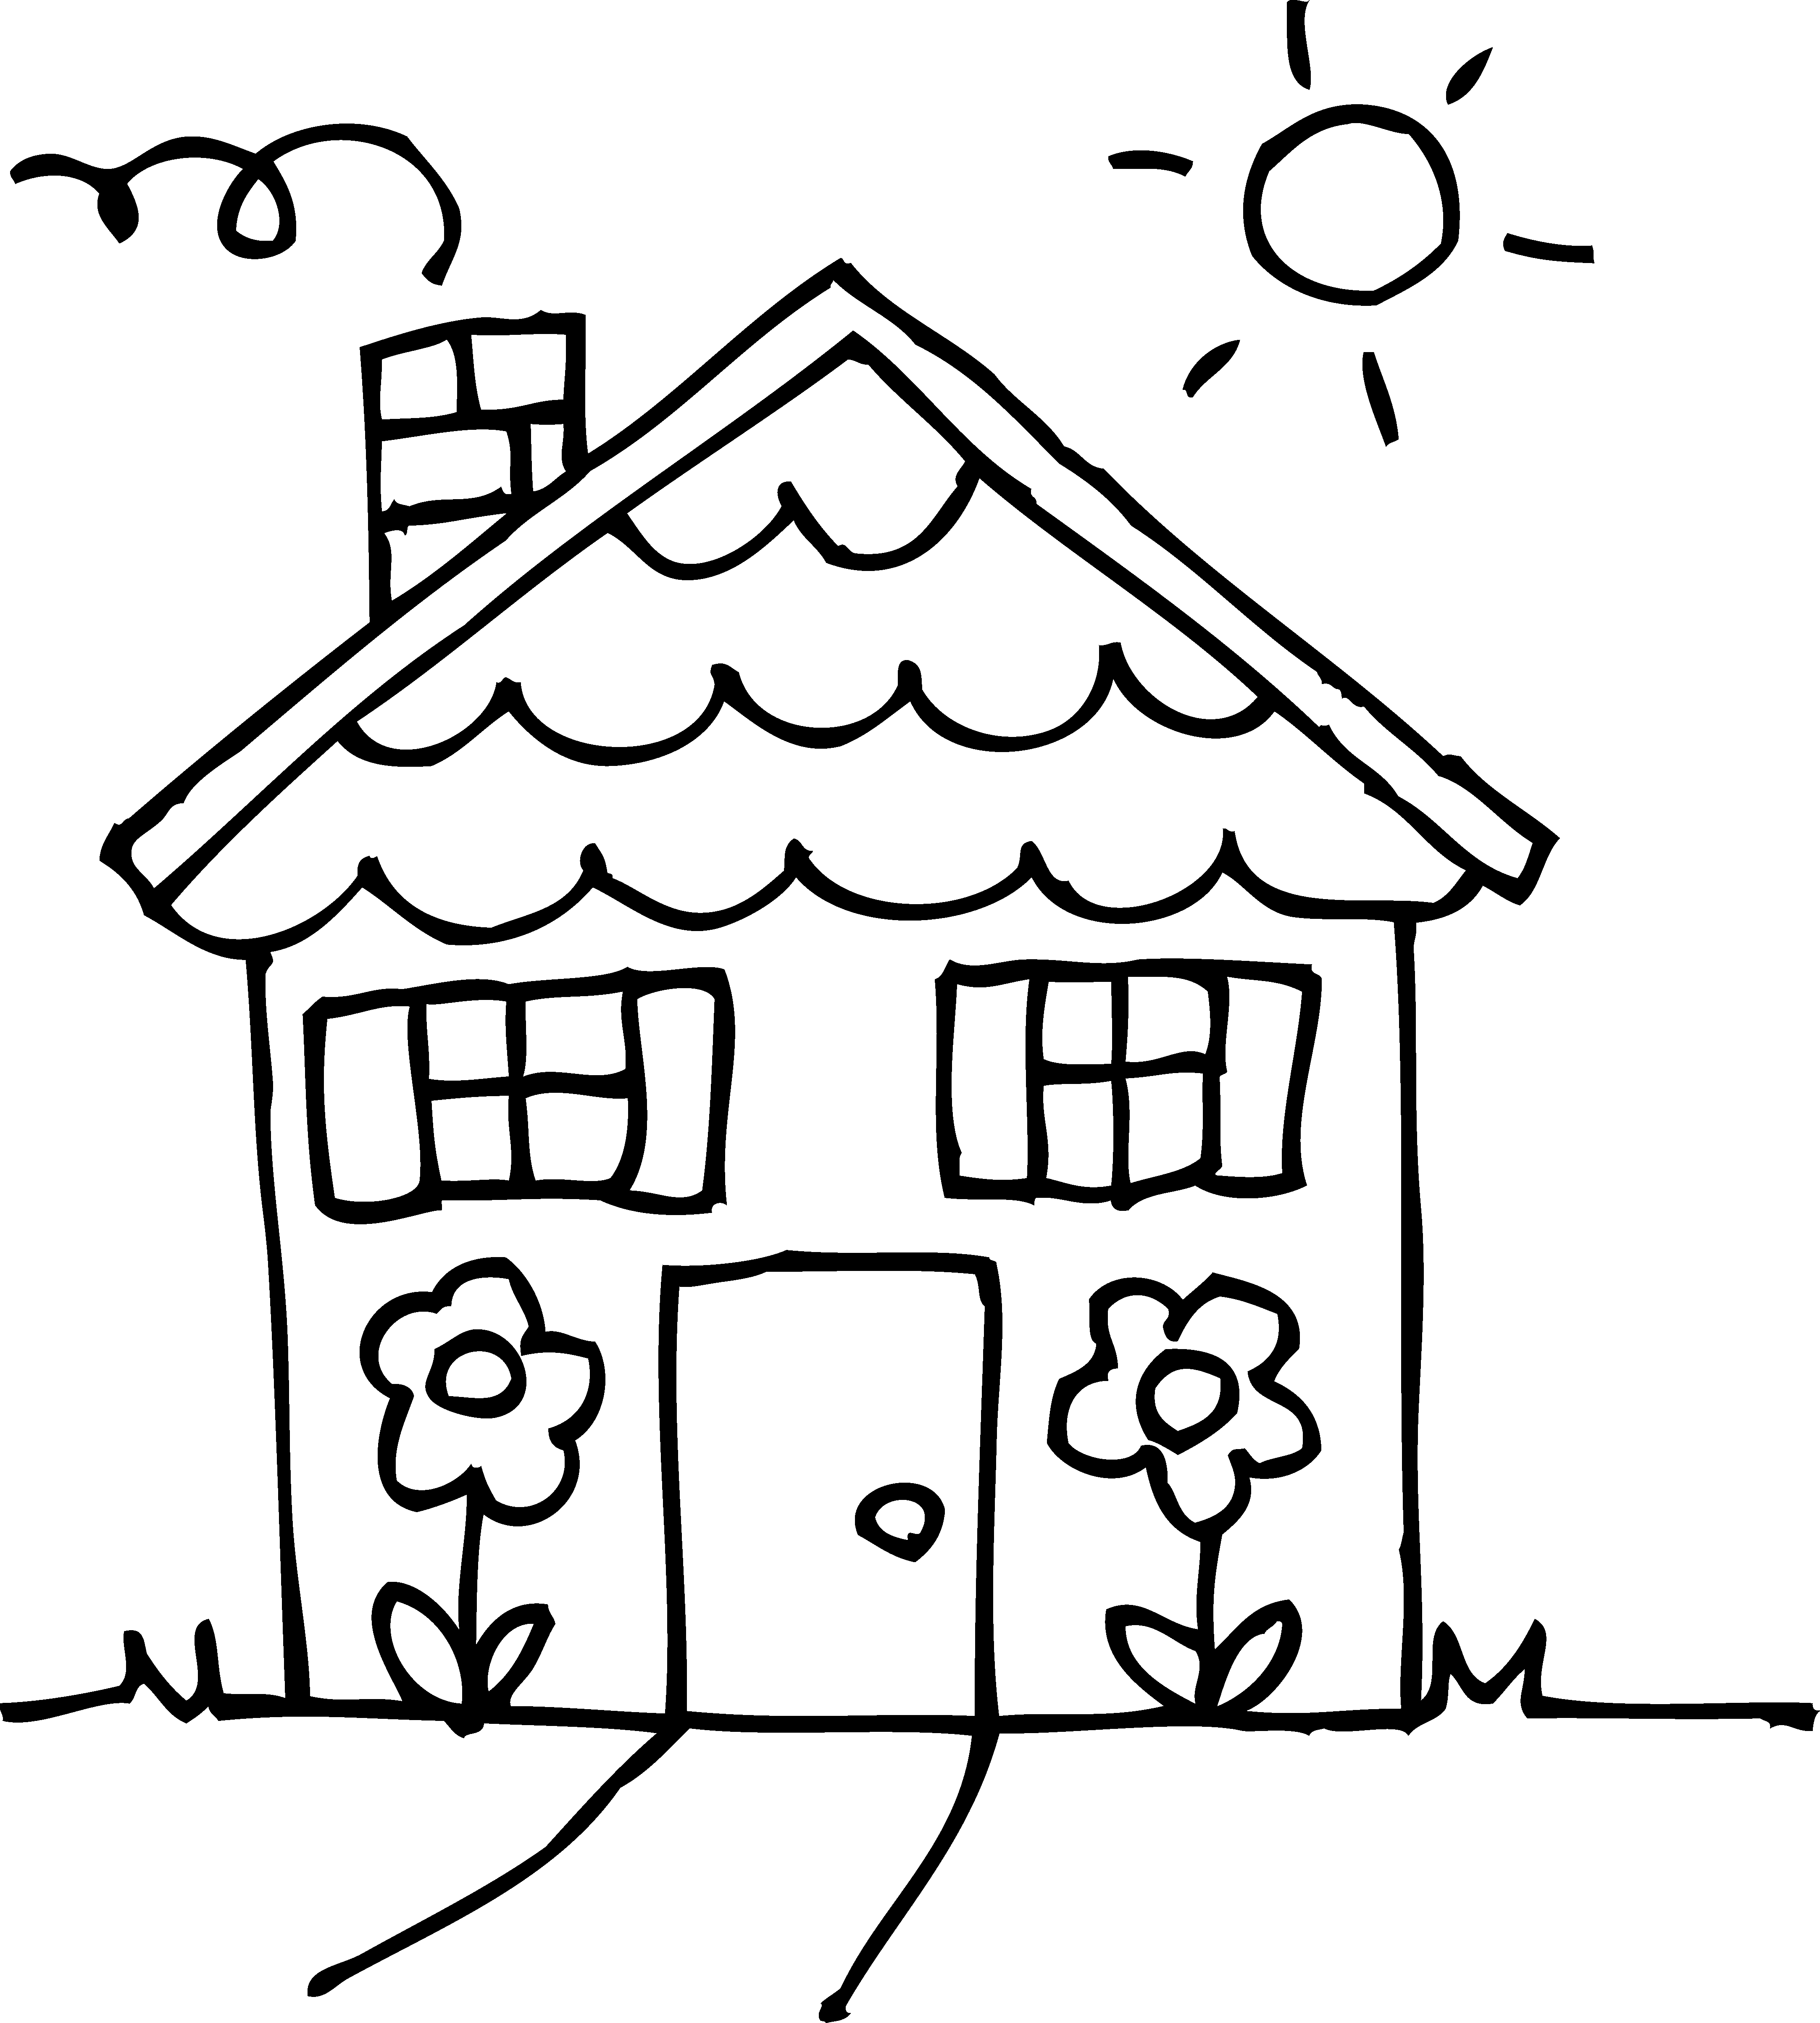 ... house coloring page clipa - Clip Art For Pages